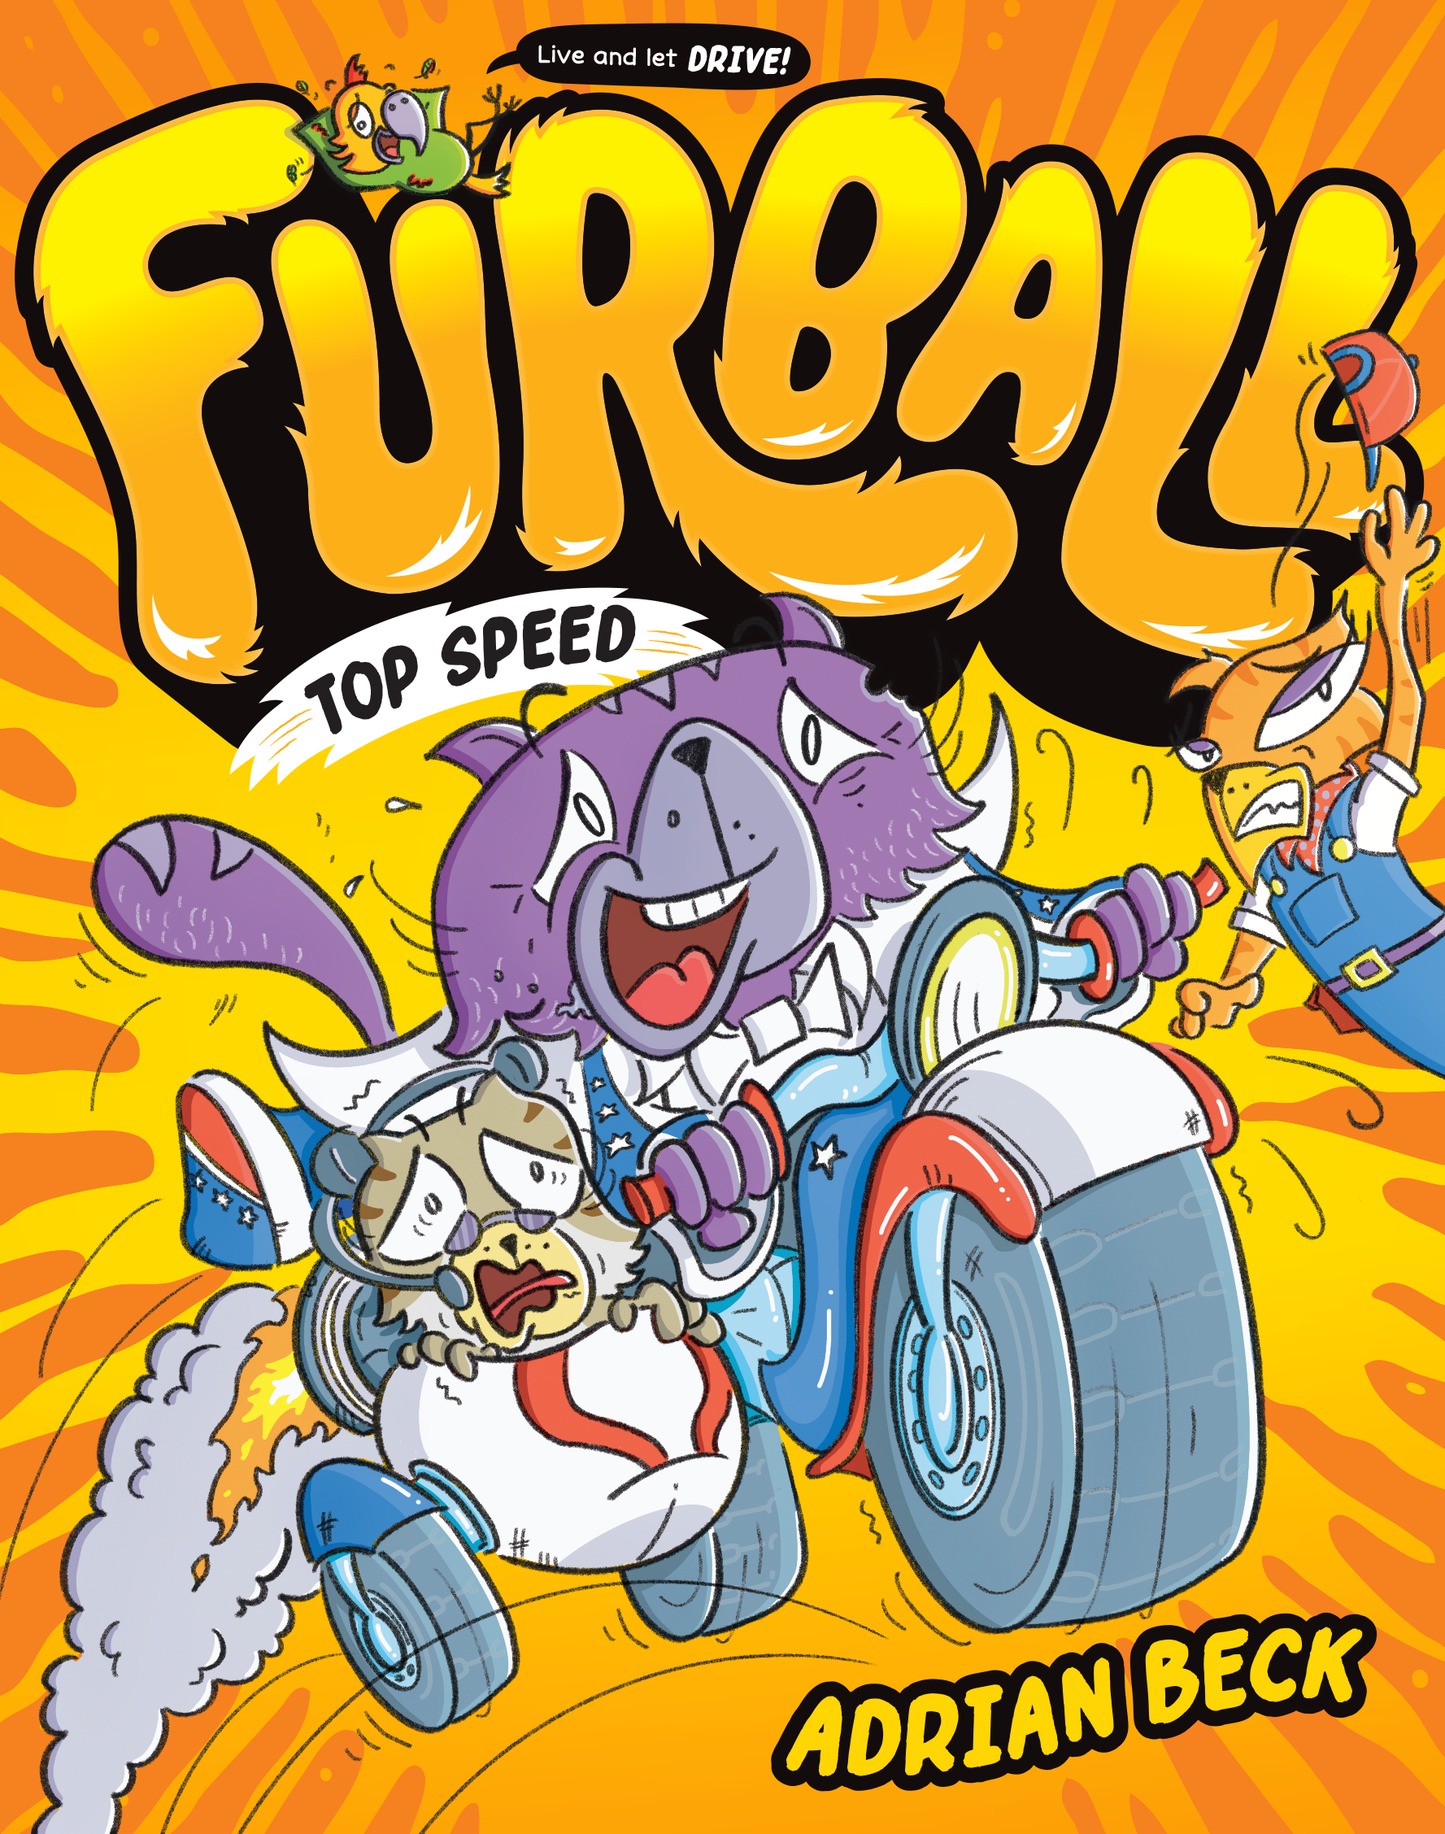 Furball: Top Speed by Adrian Beck